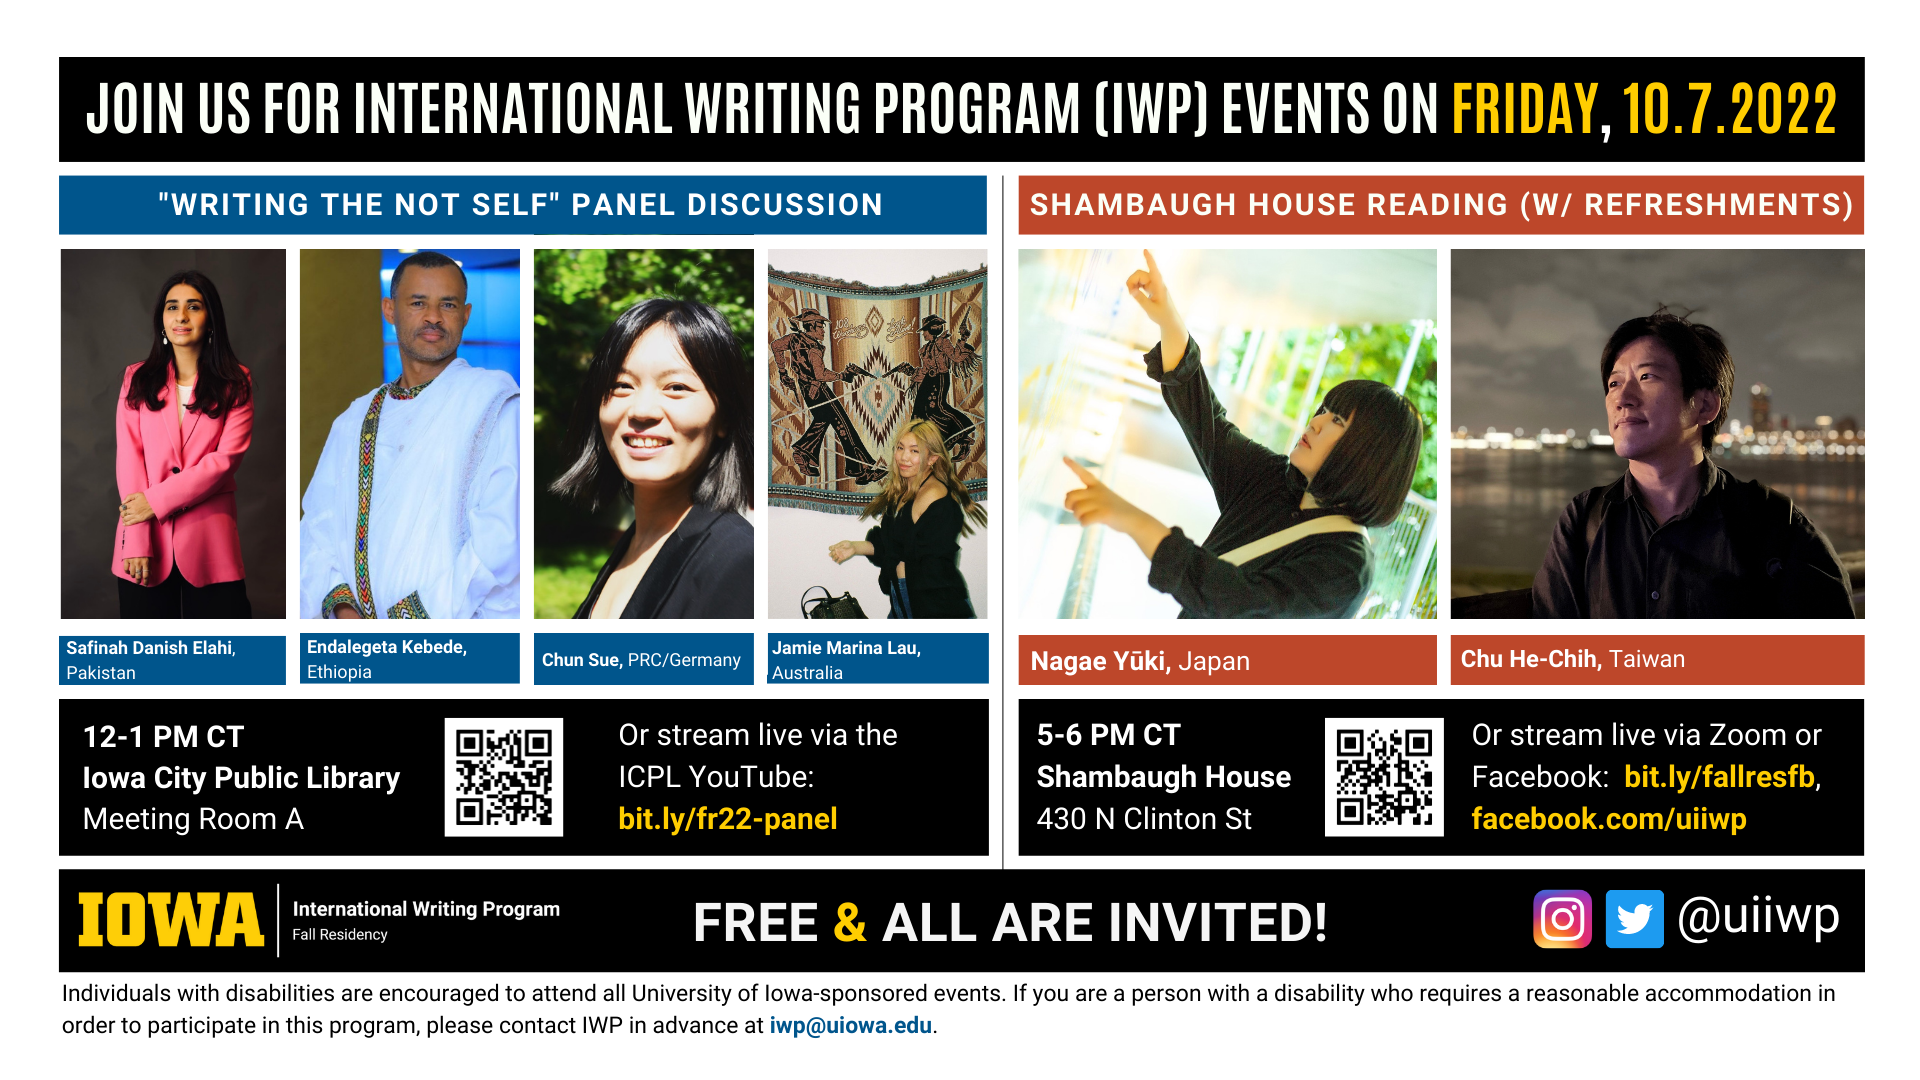 Friday, 10/7 Image: An image with two halves, each advertising one event. The image as a whole is labeled “Join us for International Writing Program (IWP) events on Friday, 10.7.2022.” The left half of the image is labeled, “'Writing the Not Self' Library Panel Discussion.” There are portraits of four writers (named below) and the following text: "Safinah Danish Elahi, Endalegeta Kebede, Ethiopia. Chun Sue, PRC/Germany. Jamie Marina Lau, Australia. 12-1 PM CT, UI Main Library, Main Library Gallery." The right half of the image is labeled “Shambaugh House Reading w/ refreshments. It features portraits of two writers (named below) and the following text: "Nagae Yūki, Japan. Chu He-Chih, Taiwan. 5-6 PM CT, Shambaugh House, 430 N. Clinton St. Or stream live via Zoom or Facebook:  bit.ly/fallresfb, facebook.com/uiiwp.” Below that text there are the IWP Fall Residency logo, the Instagram and Twitter handle @uiiwp, and a note that the event is “Free & All Are Invited.” The following text is at the bottom of the image: "Individuals with disabilities are encouraged to attend all University of Iowa-sponsored events. If you are a person with a disability who requires a reasonable accommodation in order to participate in this program, please contact IWP in advance at iwp@uiowa.edu.”